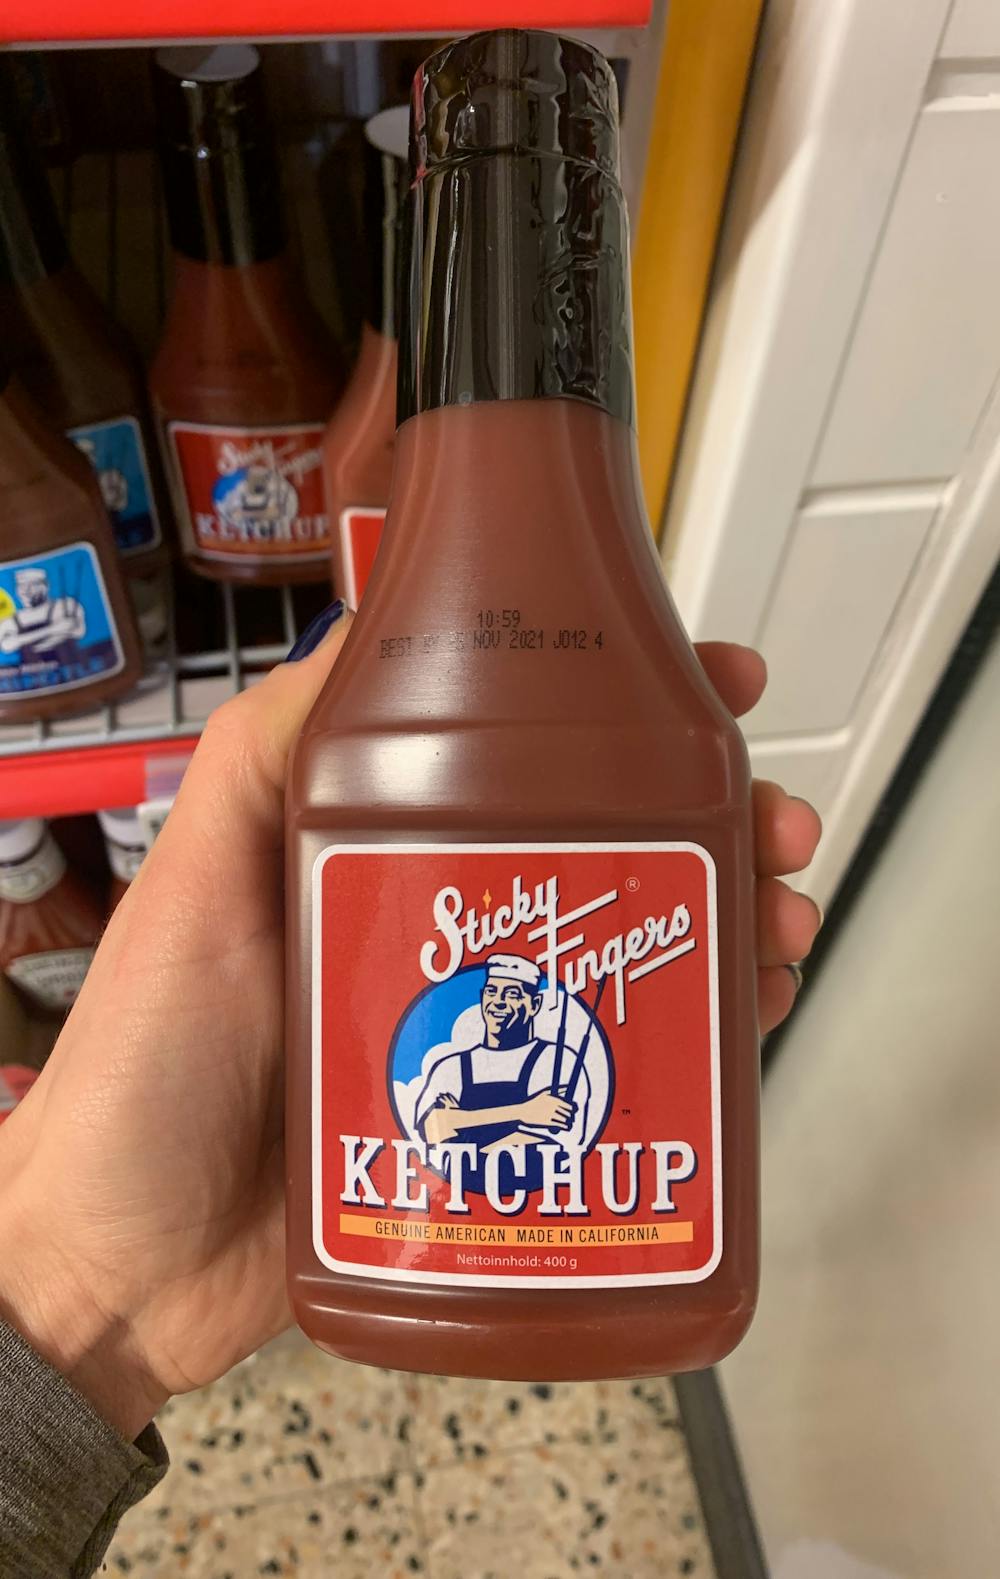 Ketchup, Sticky fingers